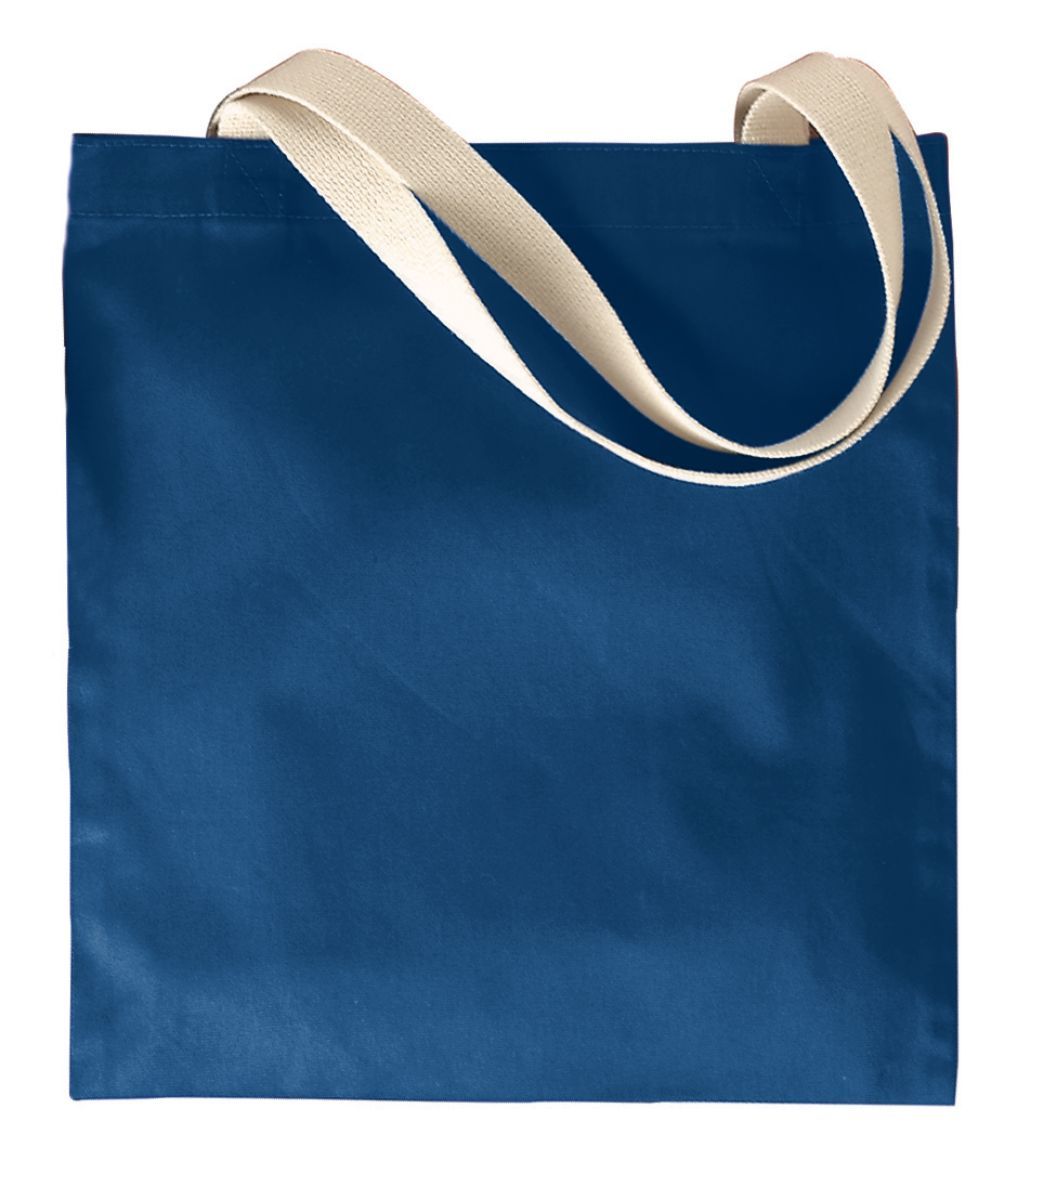 PROMOTIONAL TOTE BAG from Augusta Sportswear